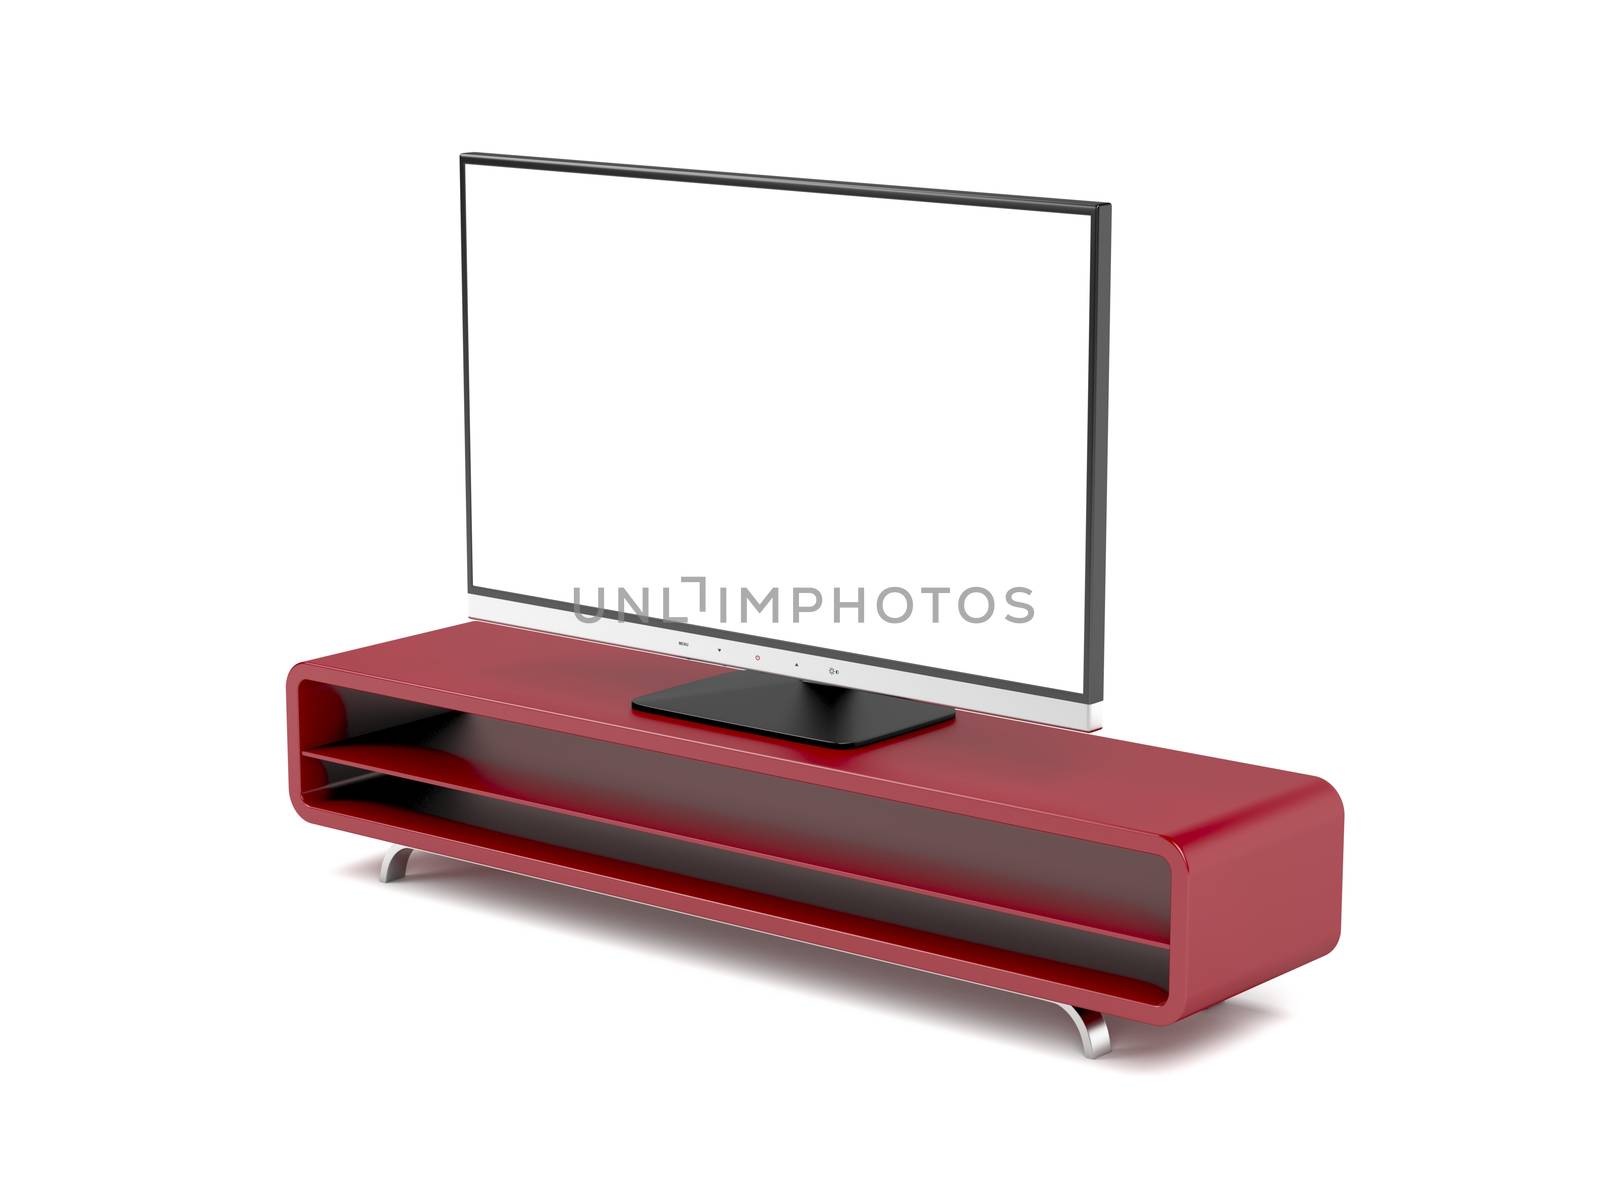 Tv with stand on white background